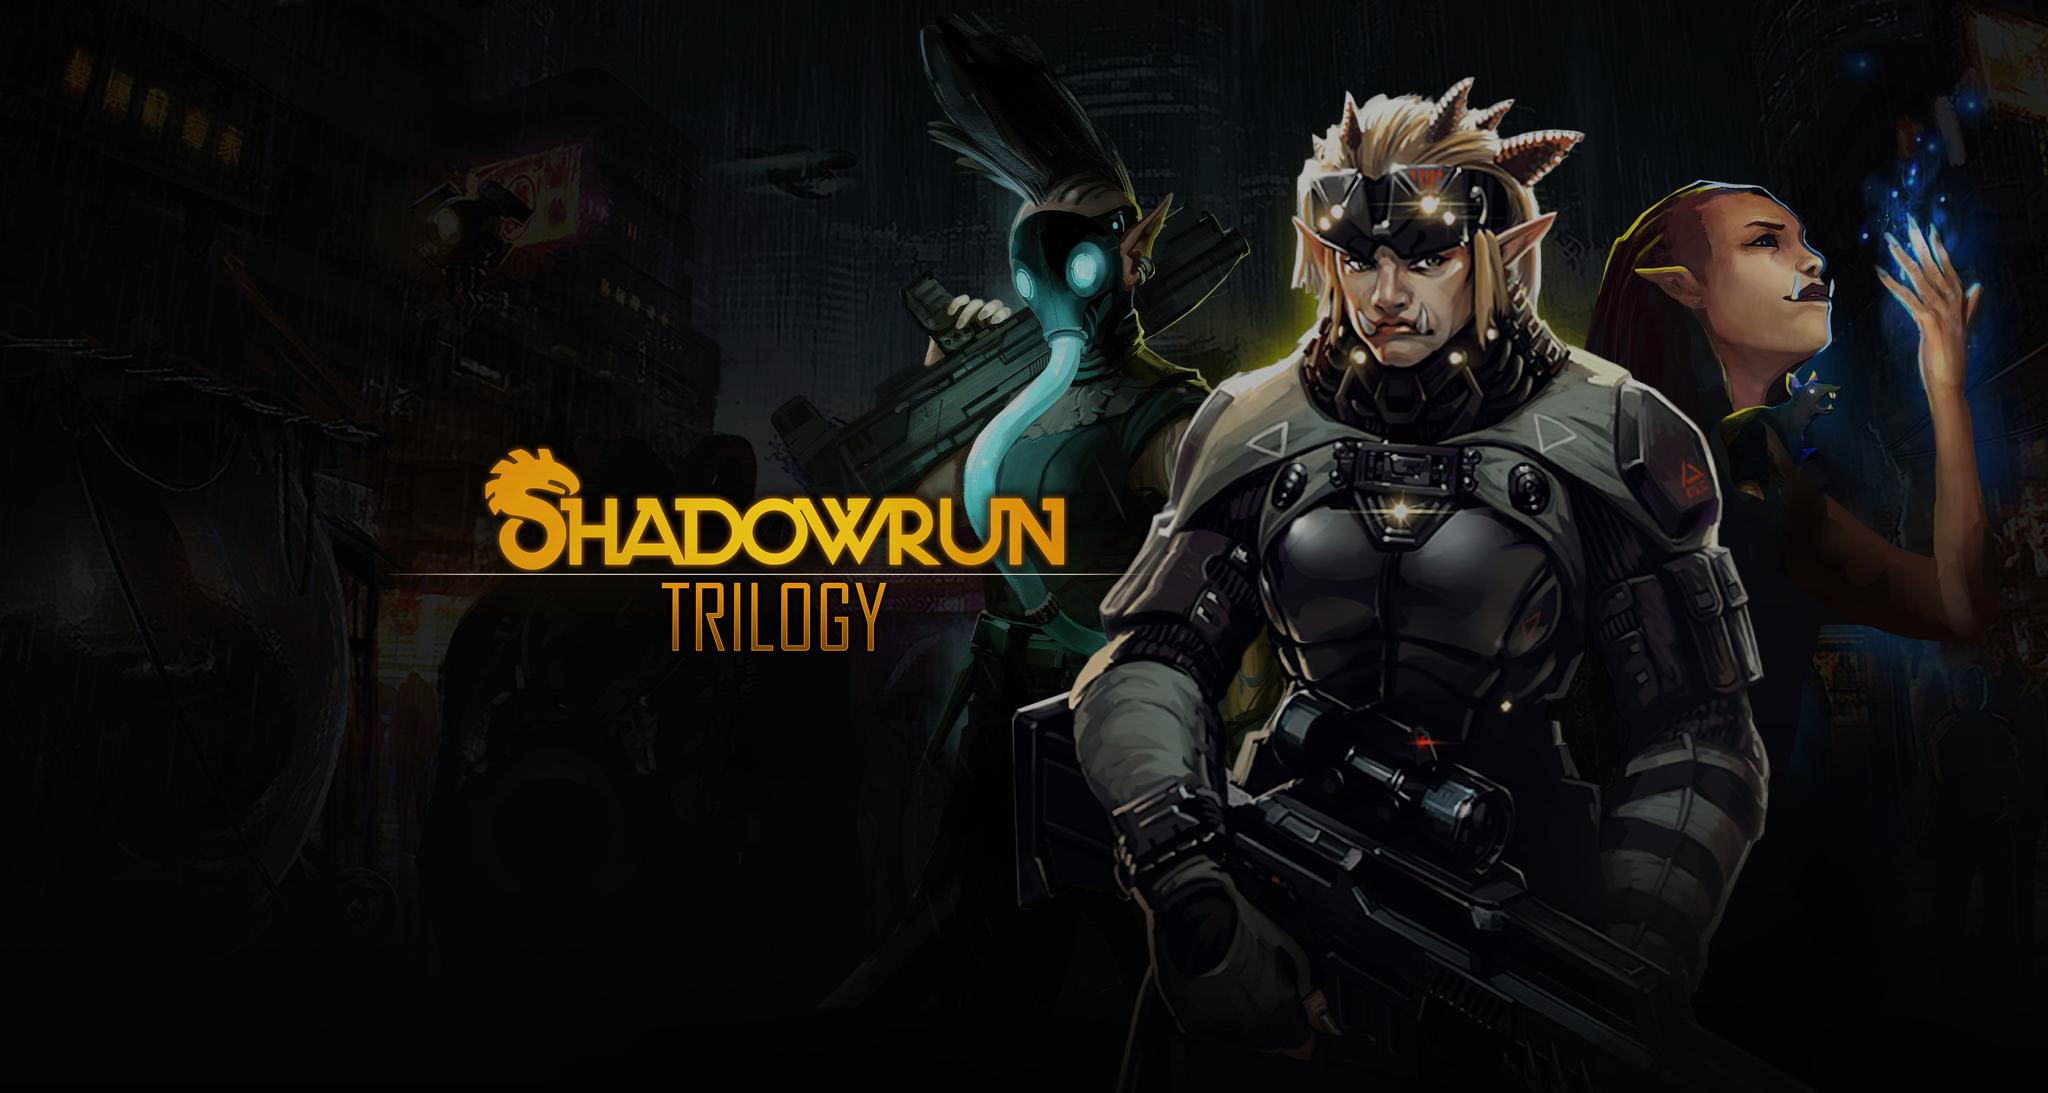 Shadowrun Trilogy is coming to consoles